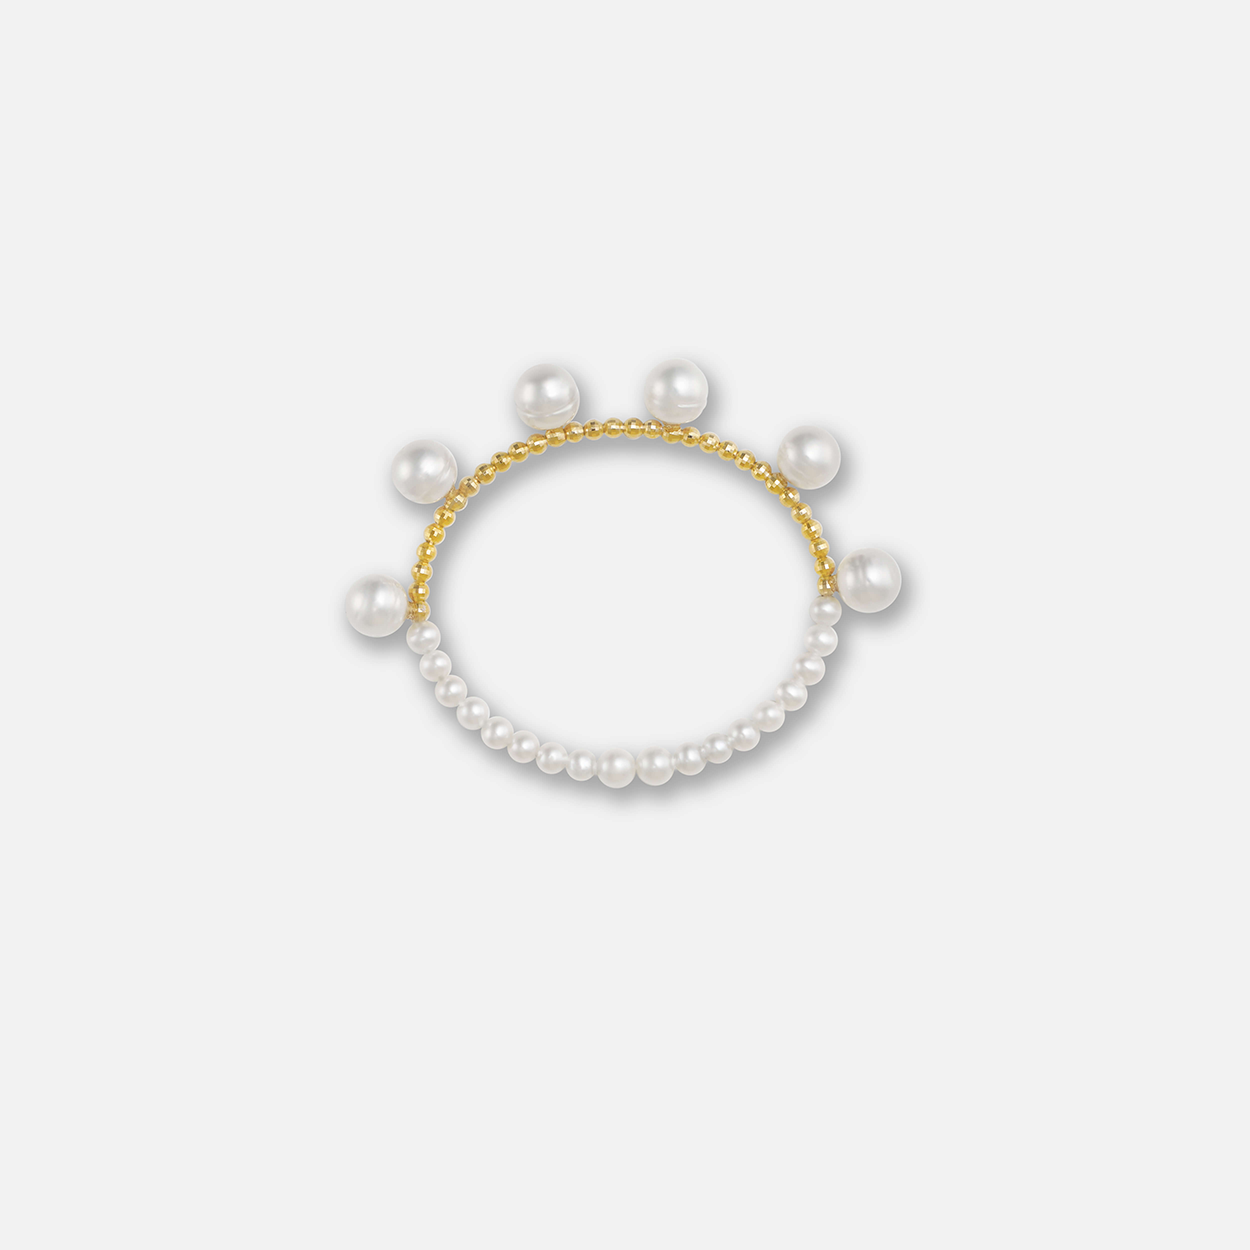 Elegant pearl bracelet with gold beads on a white background. Perfect for adding a touch of sophistication to any outfit.